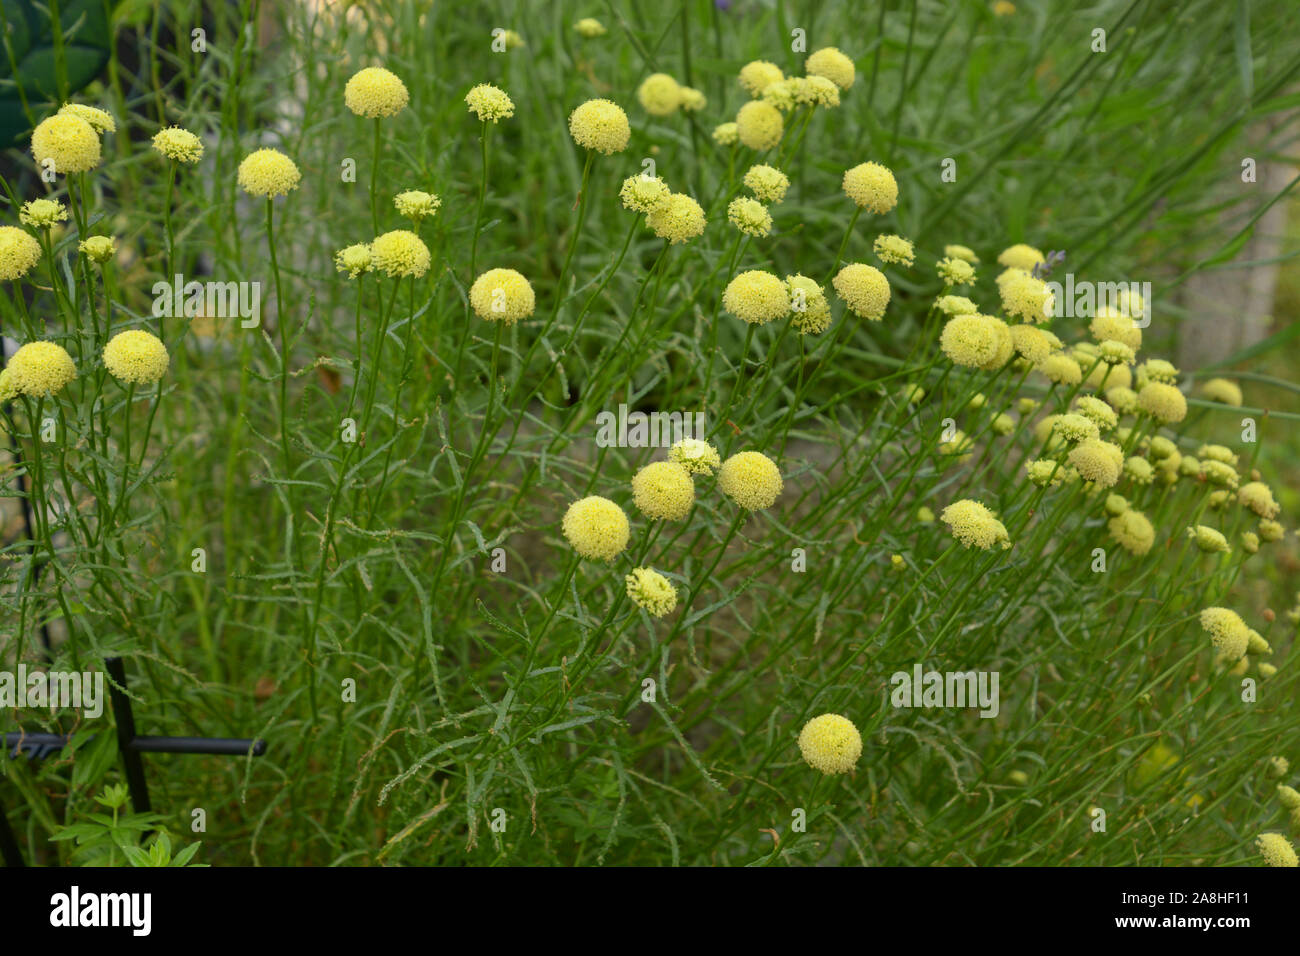 shrub of santolina virens with bright yellow flowers in summer, medicinal plant santolina in bloom Stock Photo